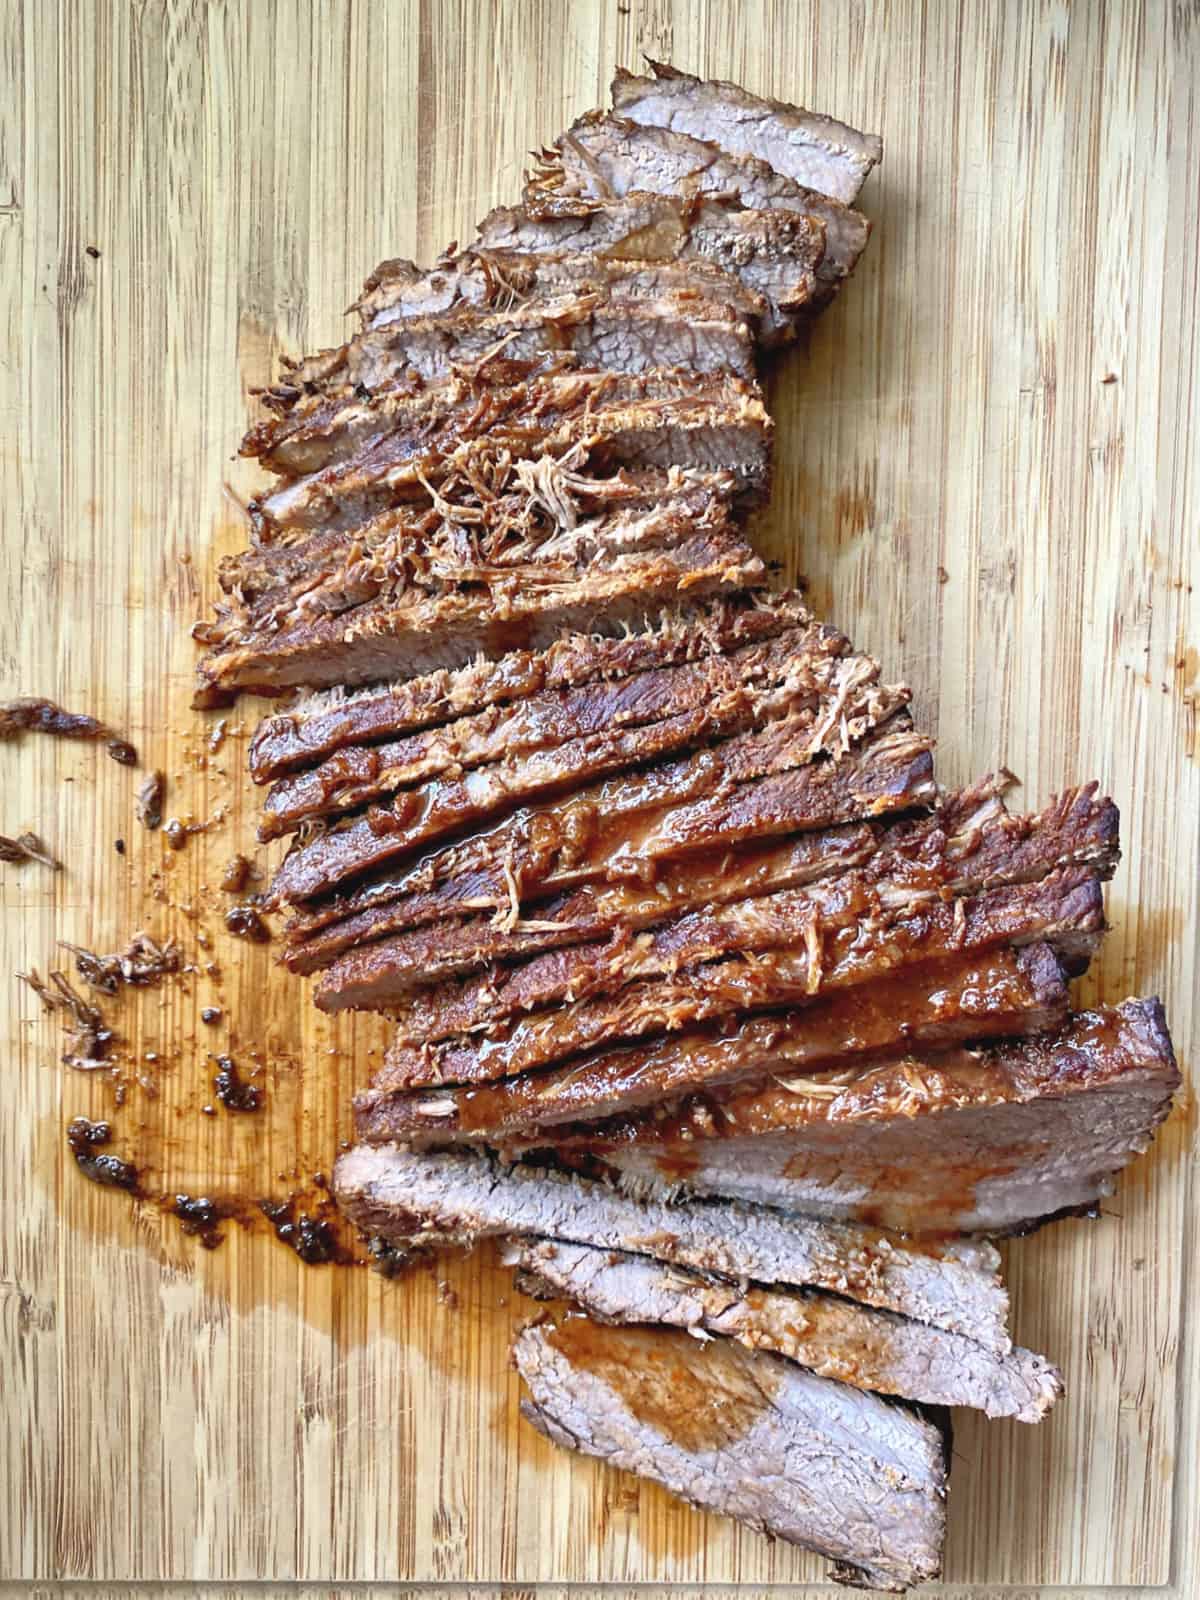 Top view of a full piece of brisket thinly sliced with sauce on top of a cutting board.